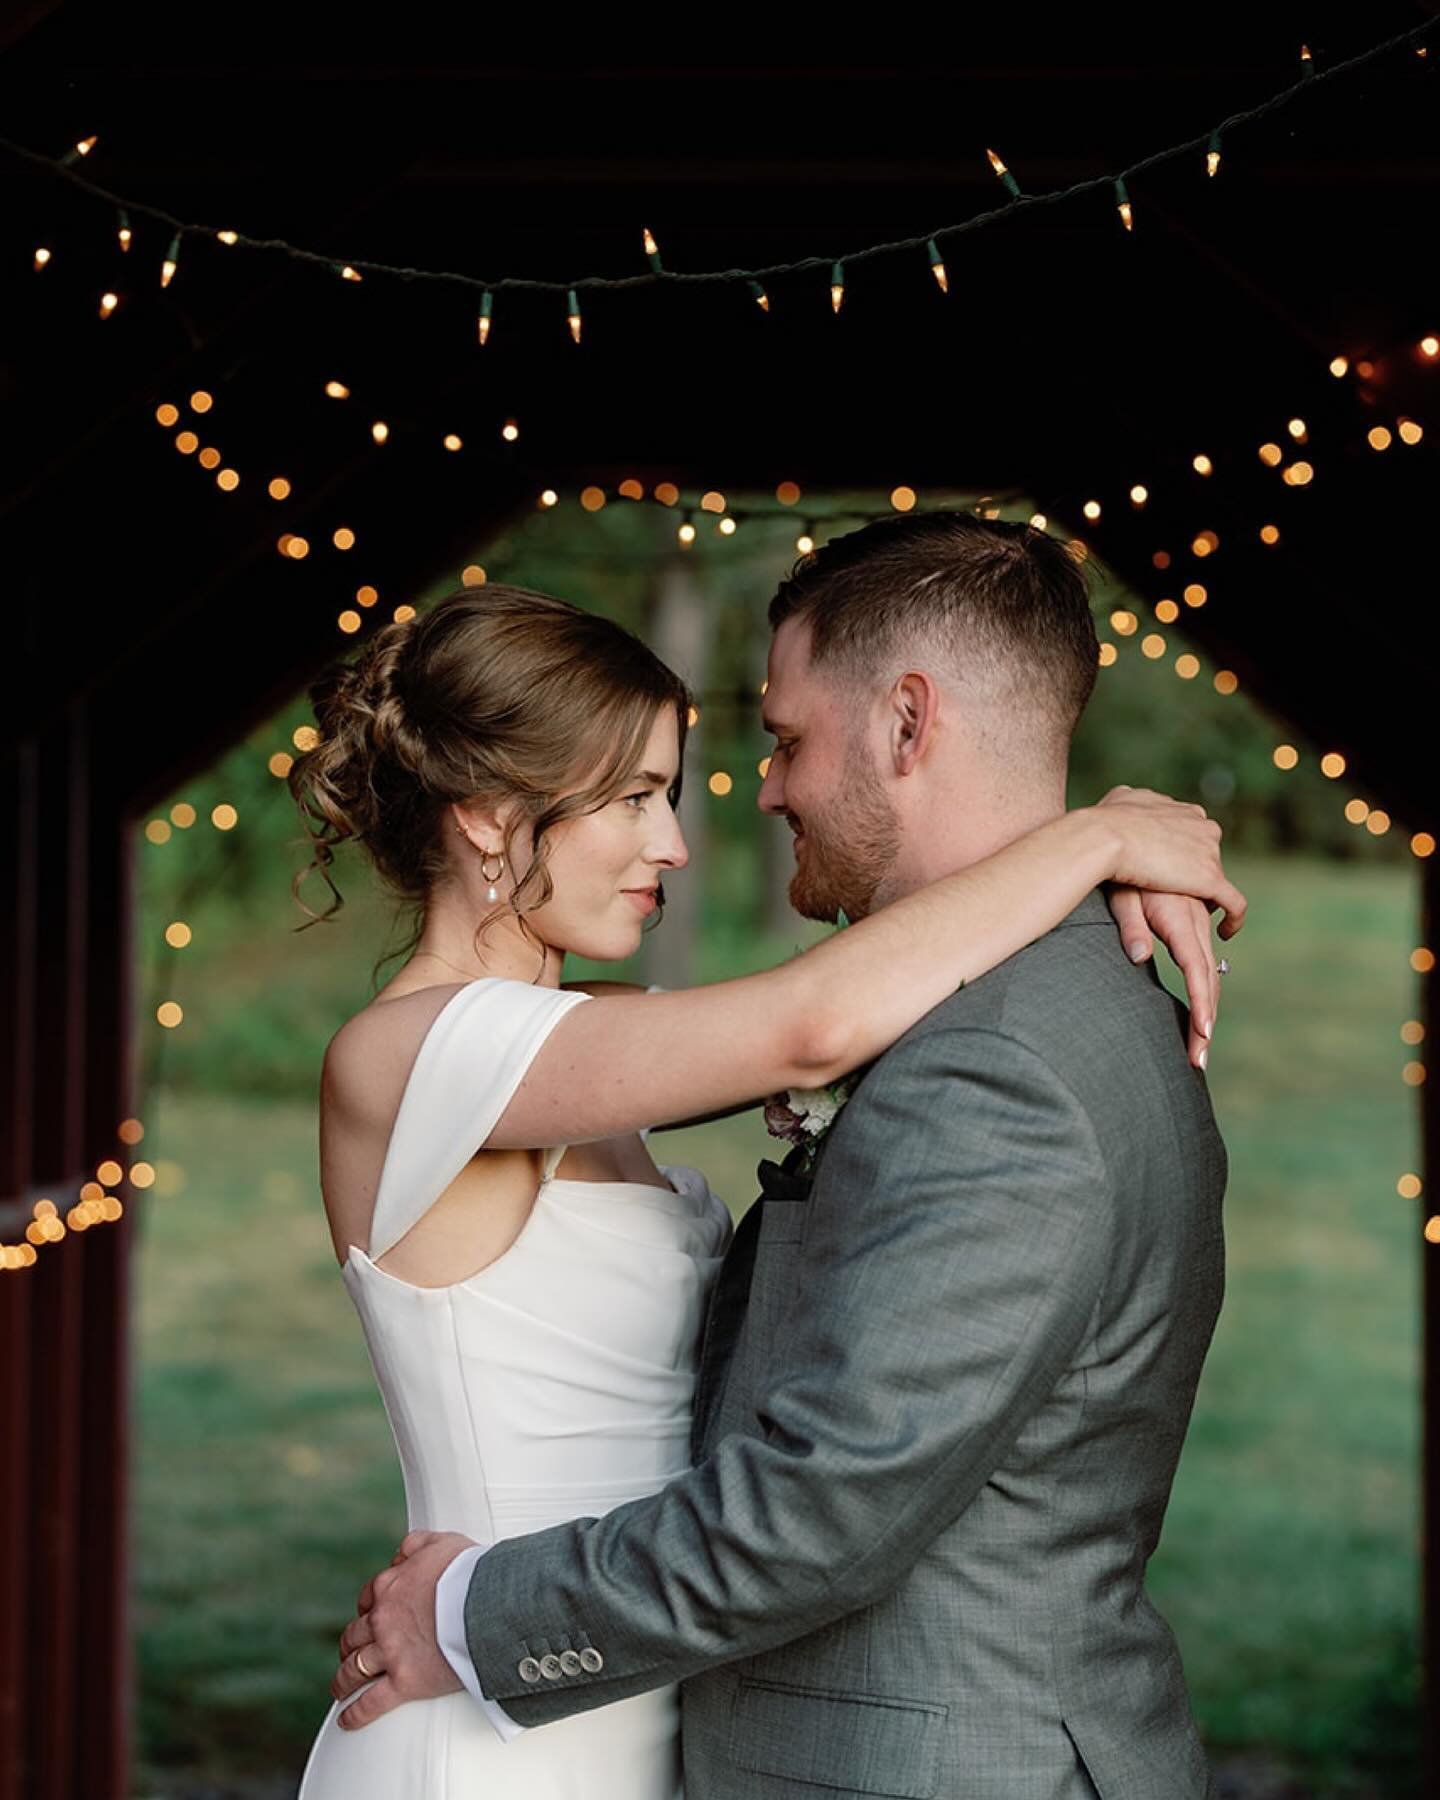 Was going through this gallery looking for something specific and had forgotten about what a total smoke show this entire wedding was&hellip; so blessing the feed with all things Ali &amp; Gabe today 😘 

Planner: @lauraelizabethweddings
Photographer